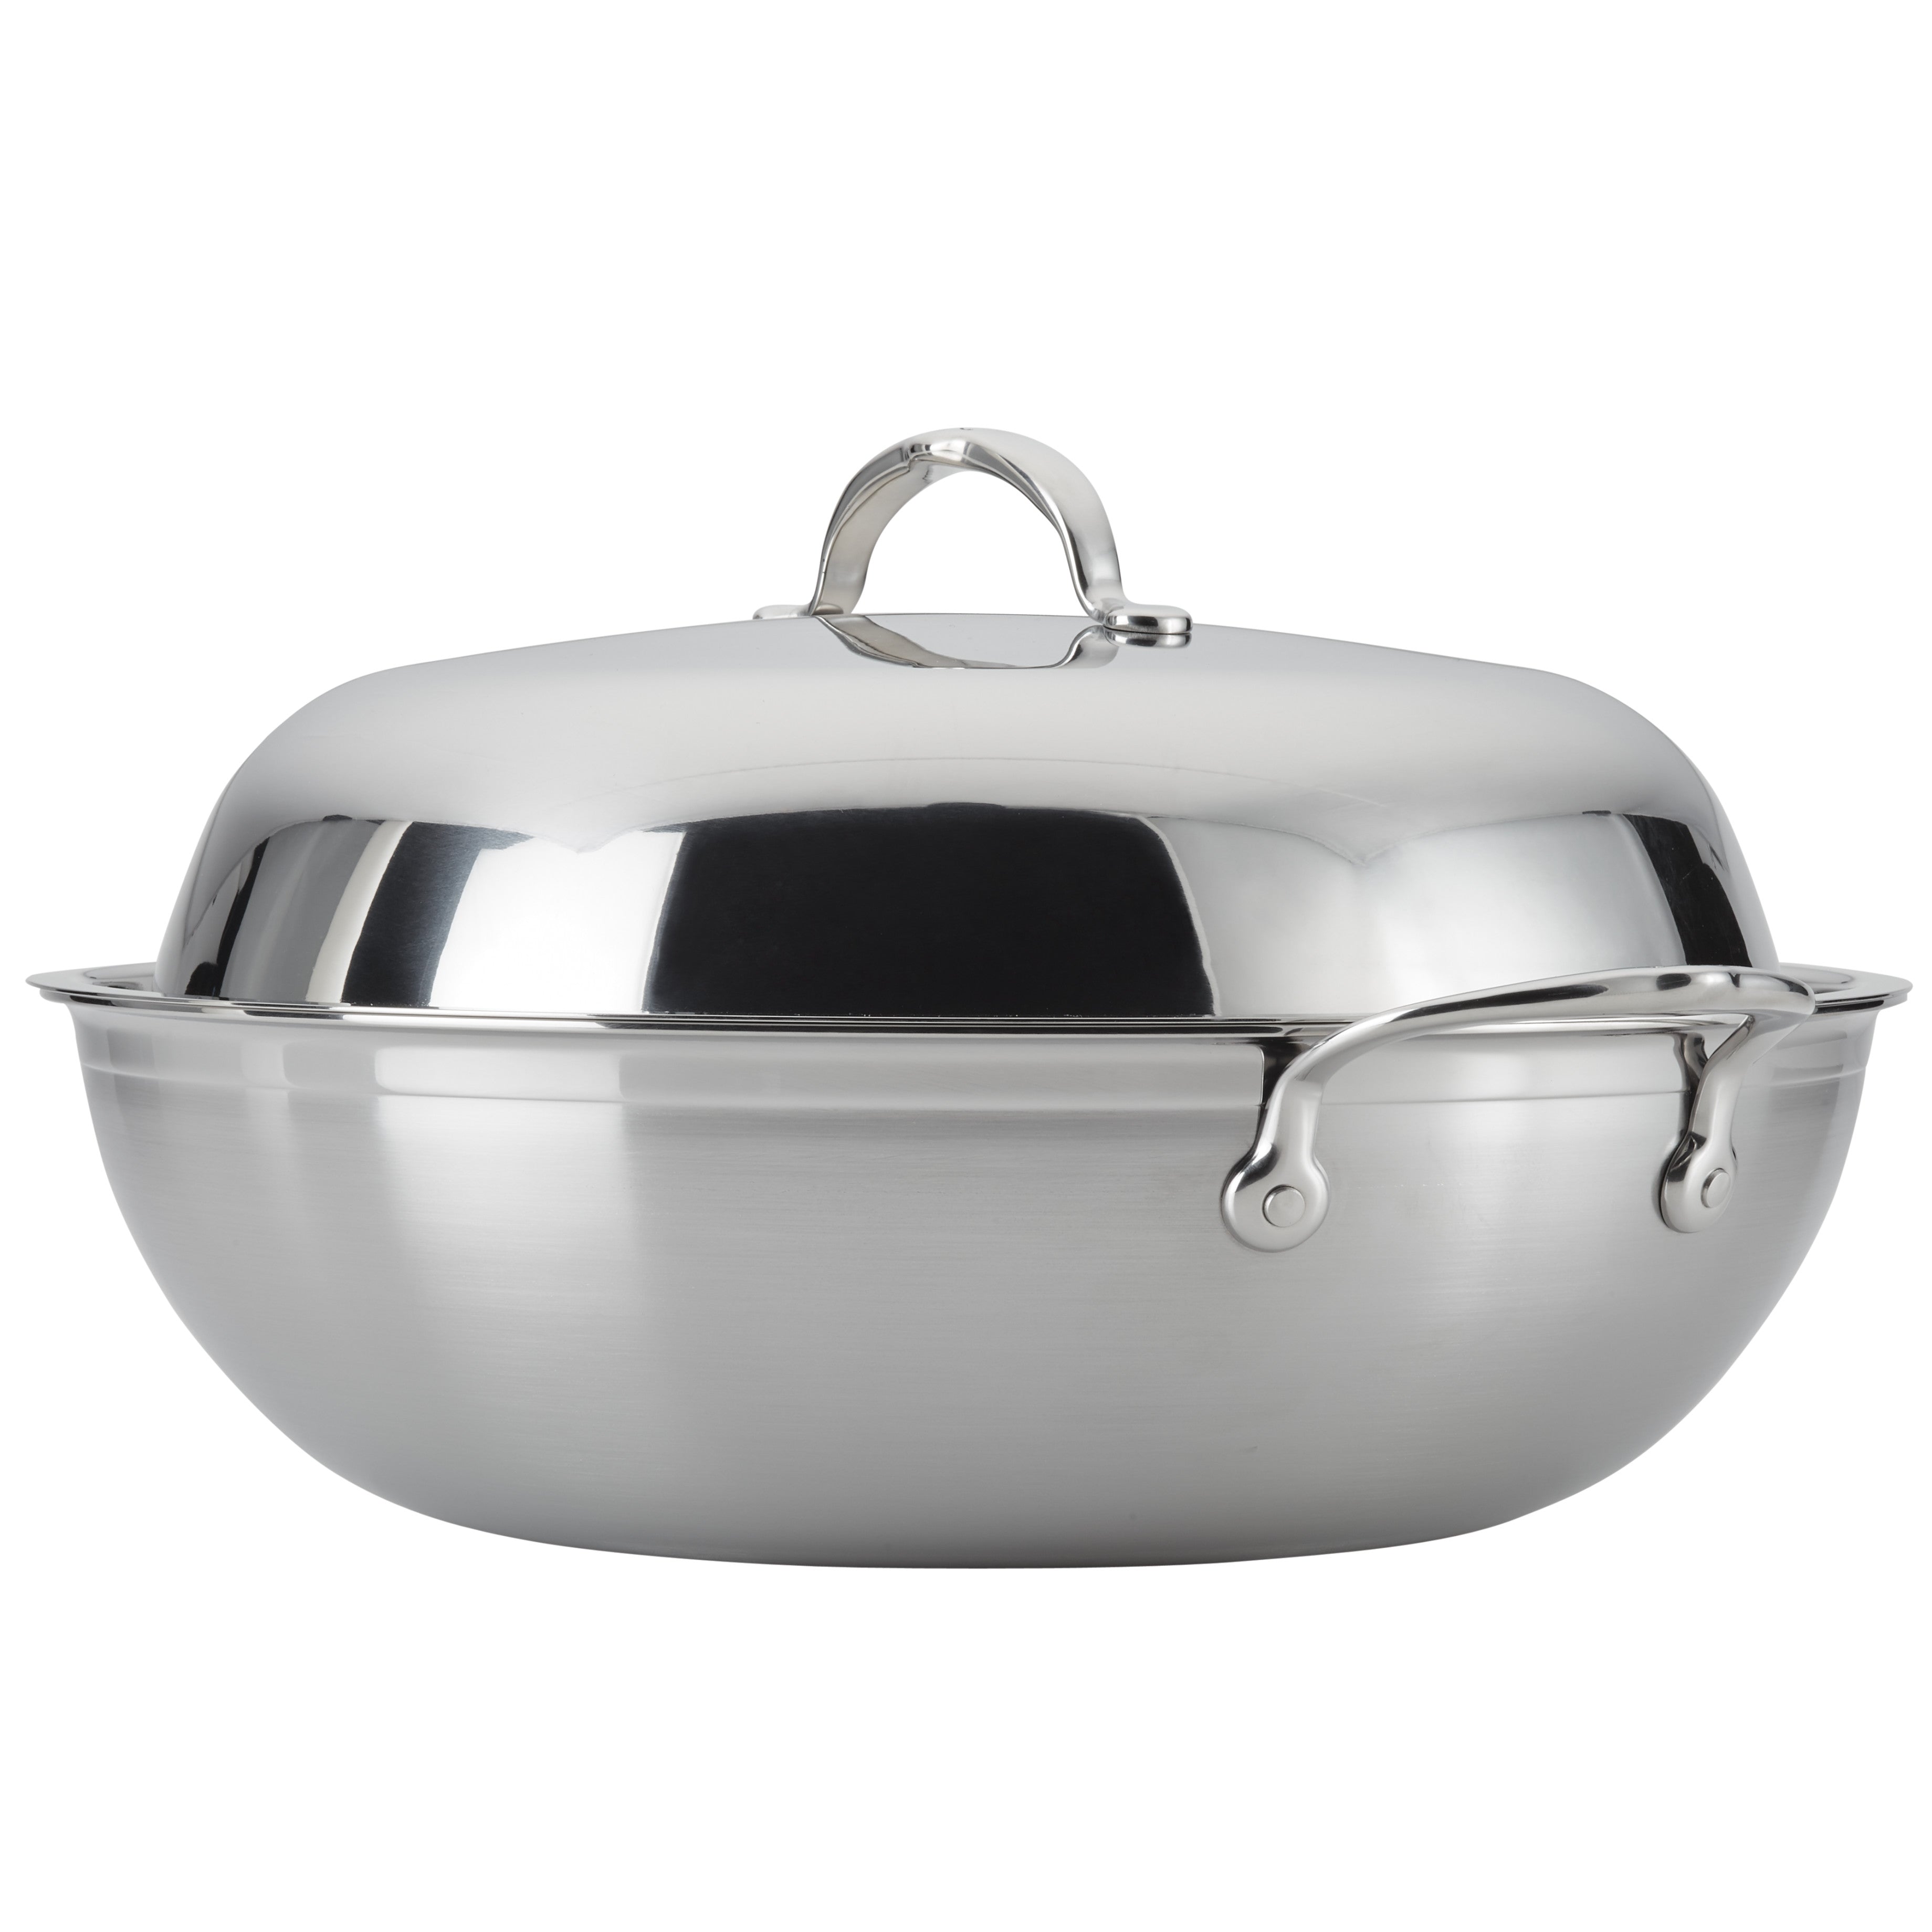 Hestan Probond Forged Stainless Steel Wok with Lid, 14-inch on Food52